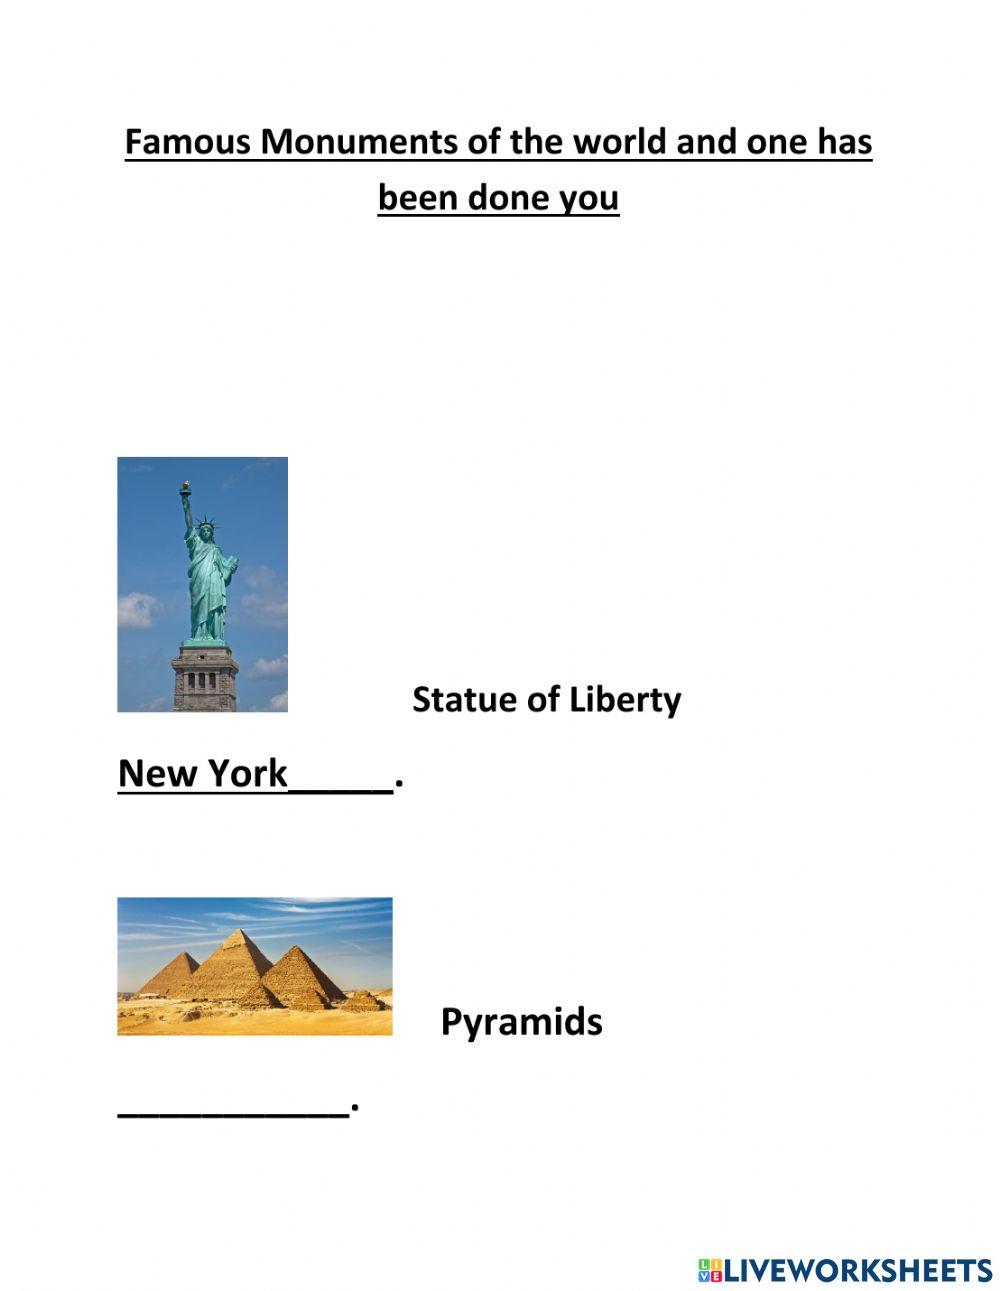 Famous Monuments of the world